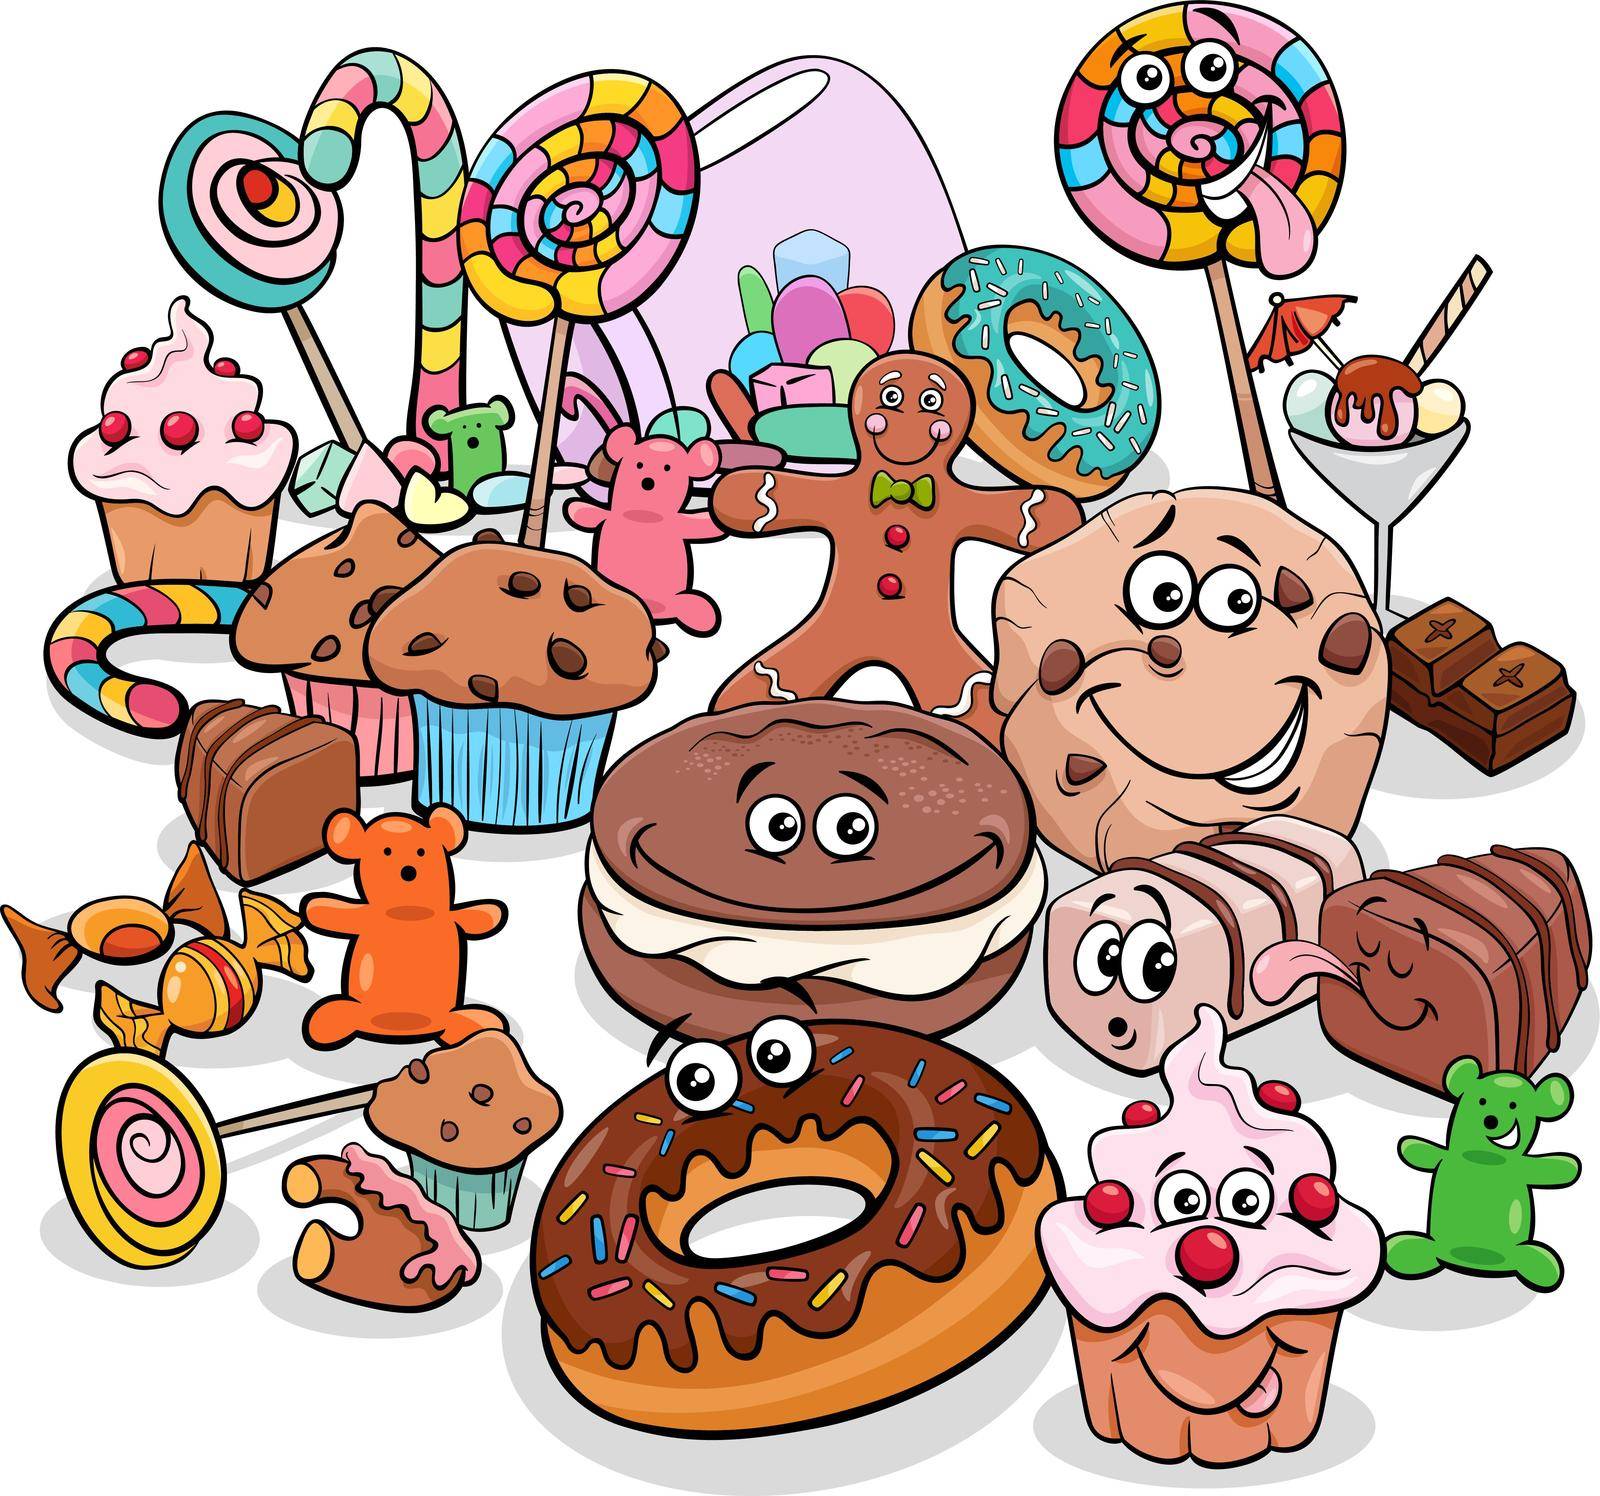 cartoon illustration of sweet food objets and candy objects group